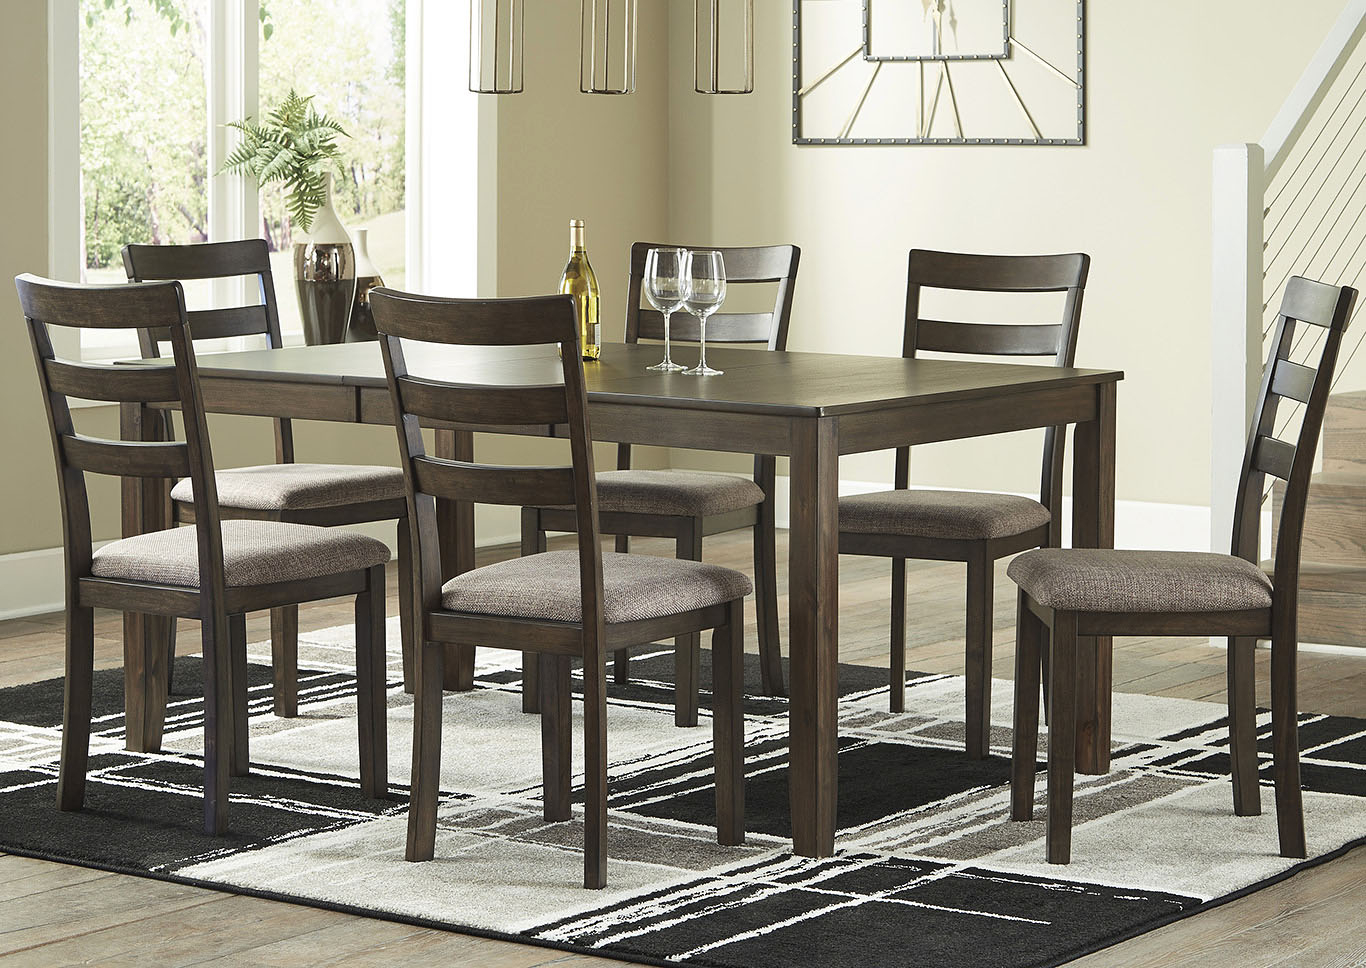 Wine Country Furniture Drewing Dining Room Table W6 Side Chairs intended for sizing 1366 X 968